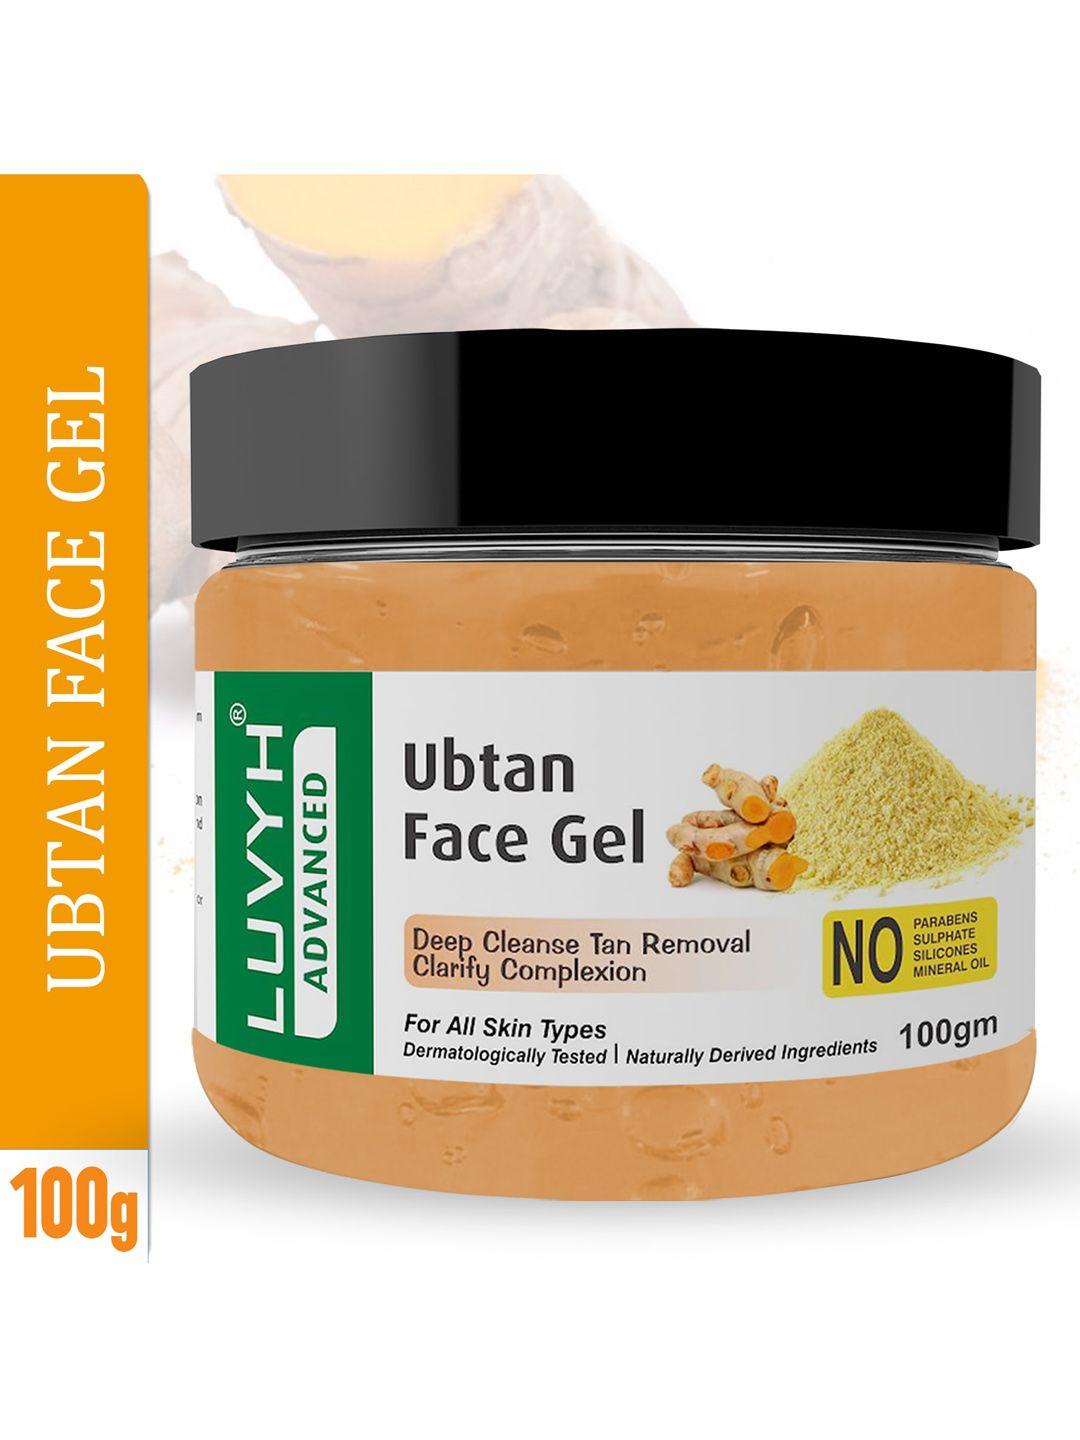 luvyh ubtan deep cleanse tan removal face gel for all skin types